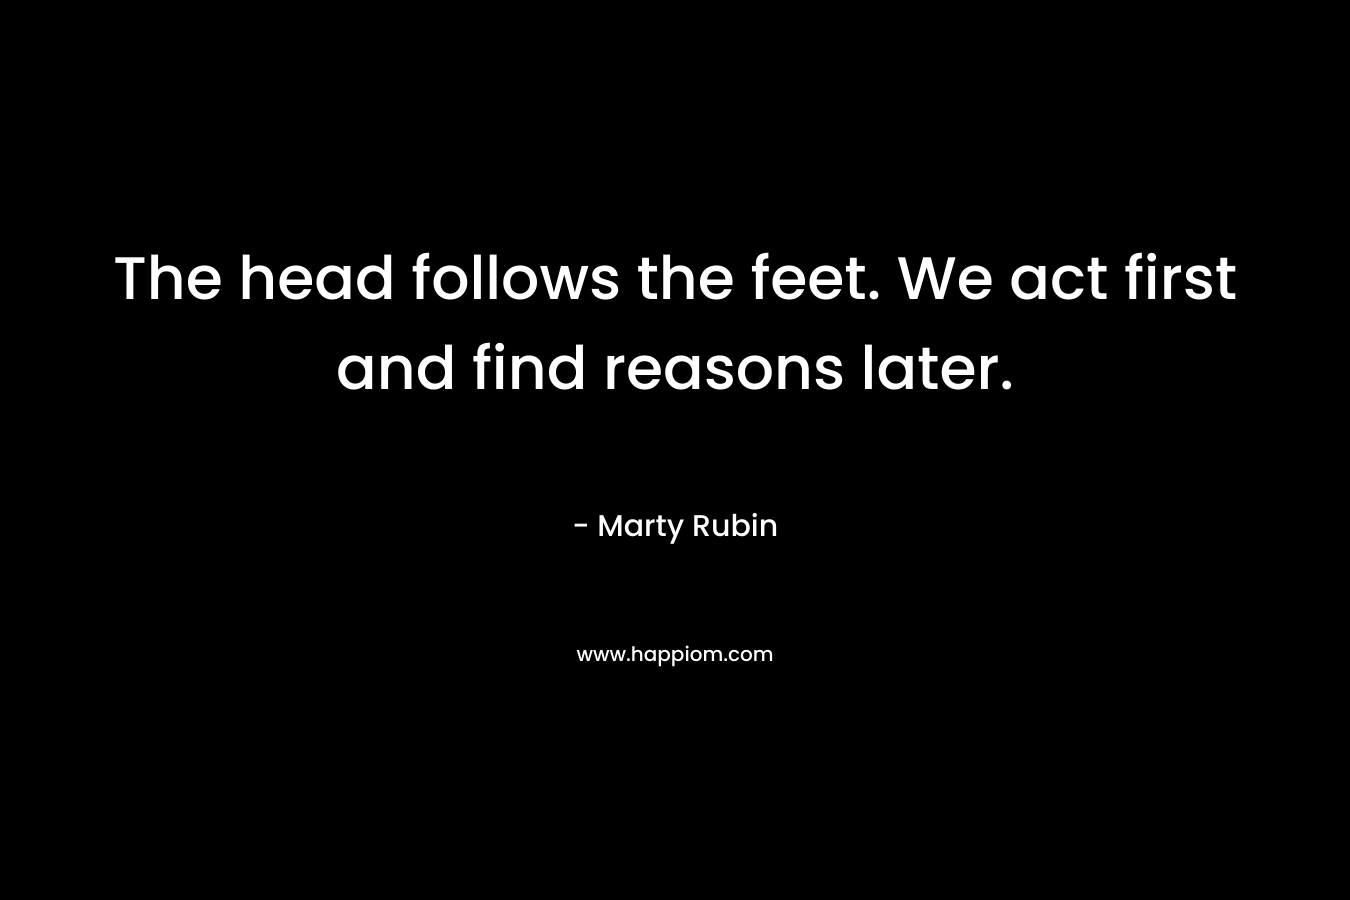 The head follows the feet. We act first and find reasons later. – Marty Rubin